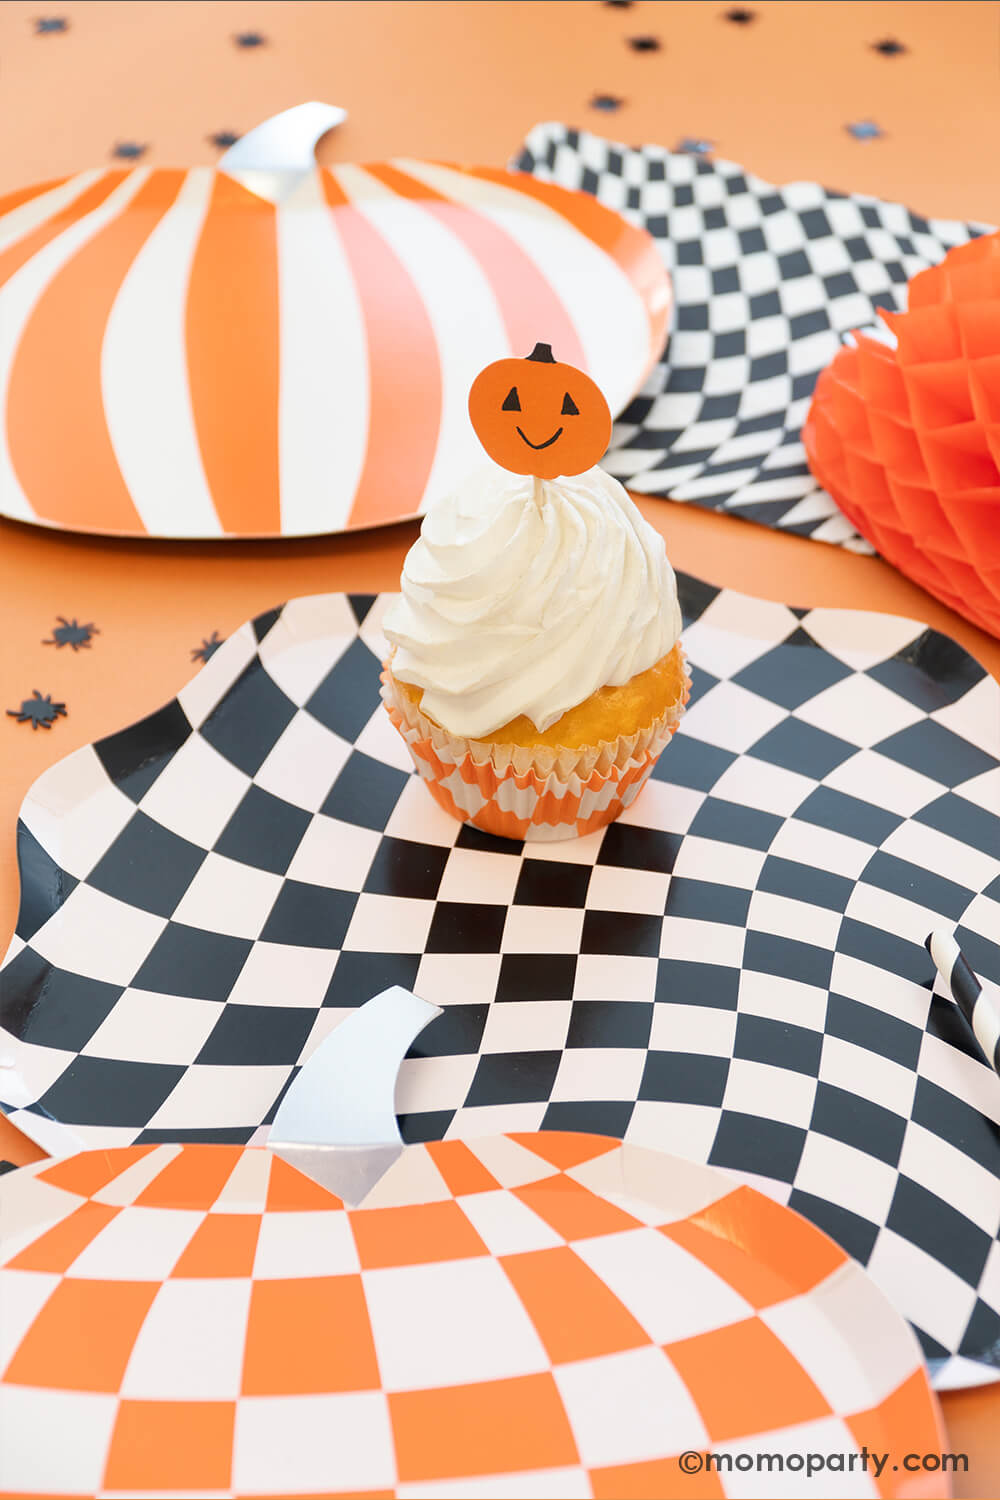 A festive Halloween party table featuring Momo Party's Halloween swirl checkered plates, napkins and cups, along with mod patterned pumpkin shaped plates in orange and black, with a honeycomb spider decoration and confetti around it makes a spooky yet fun inspiration for a kid's friendly Halloween party.